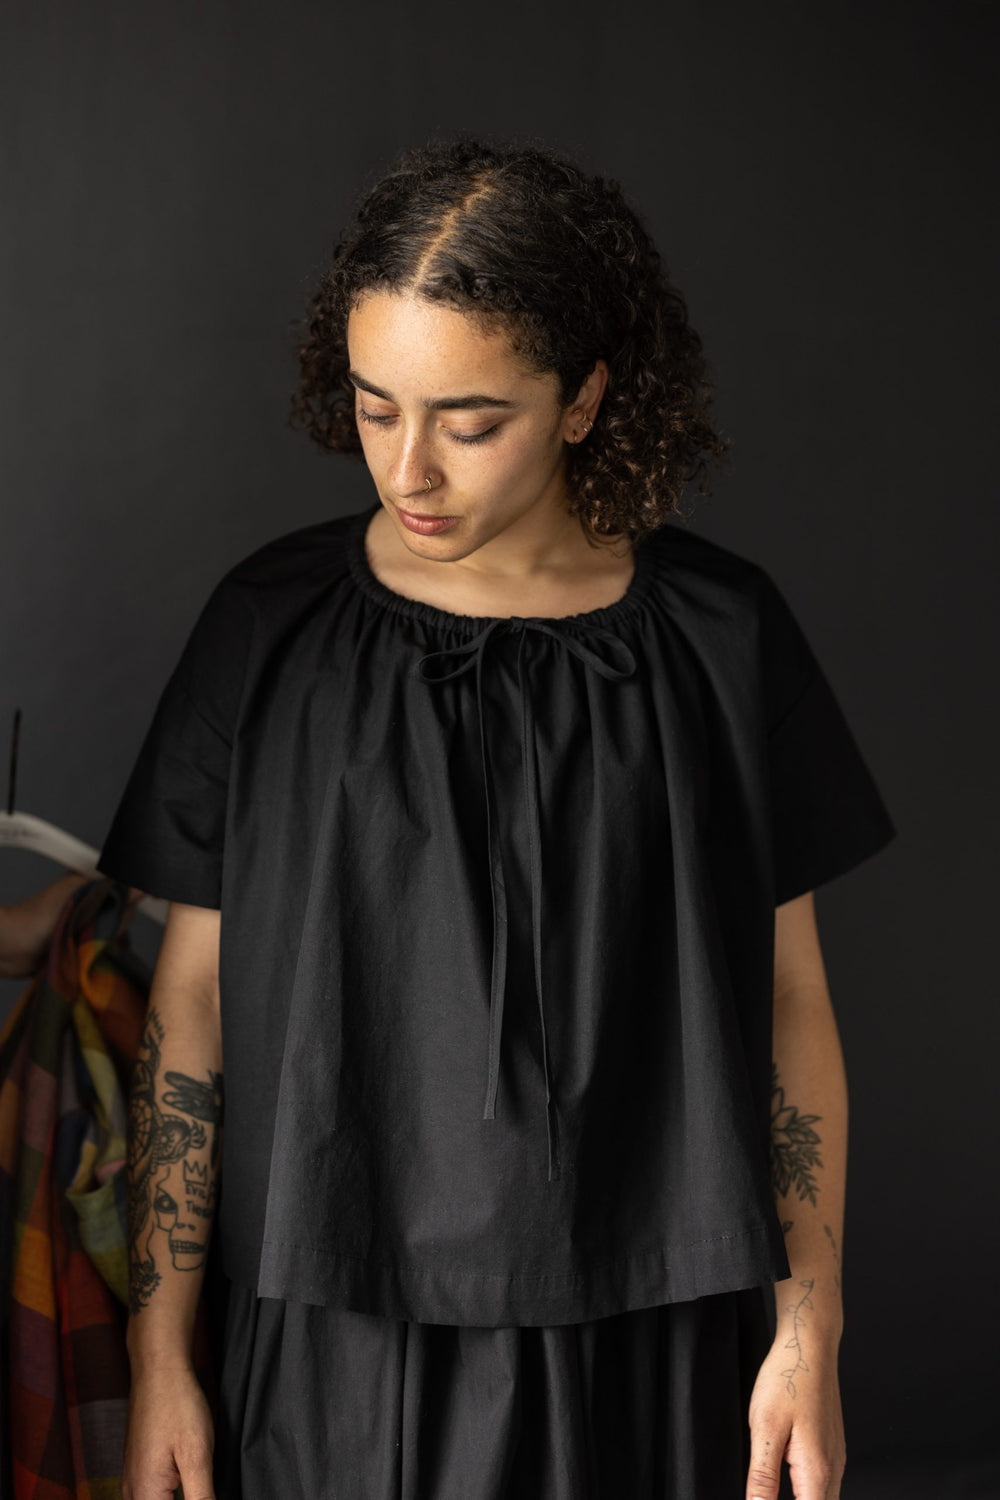 Woman wearing the Clover Top sewing pattern from Merchant & Mills on The Fold Line. A top pattern made in linen, brushed cotton, cotton lawn, cotton poplin, tencel, Indian handlooms, lightweight baby cord or cotton double gauze fabrics, featuring a gather